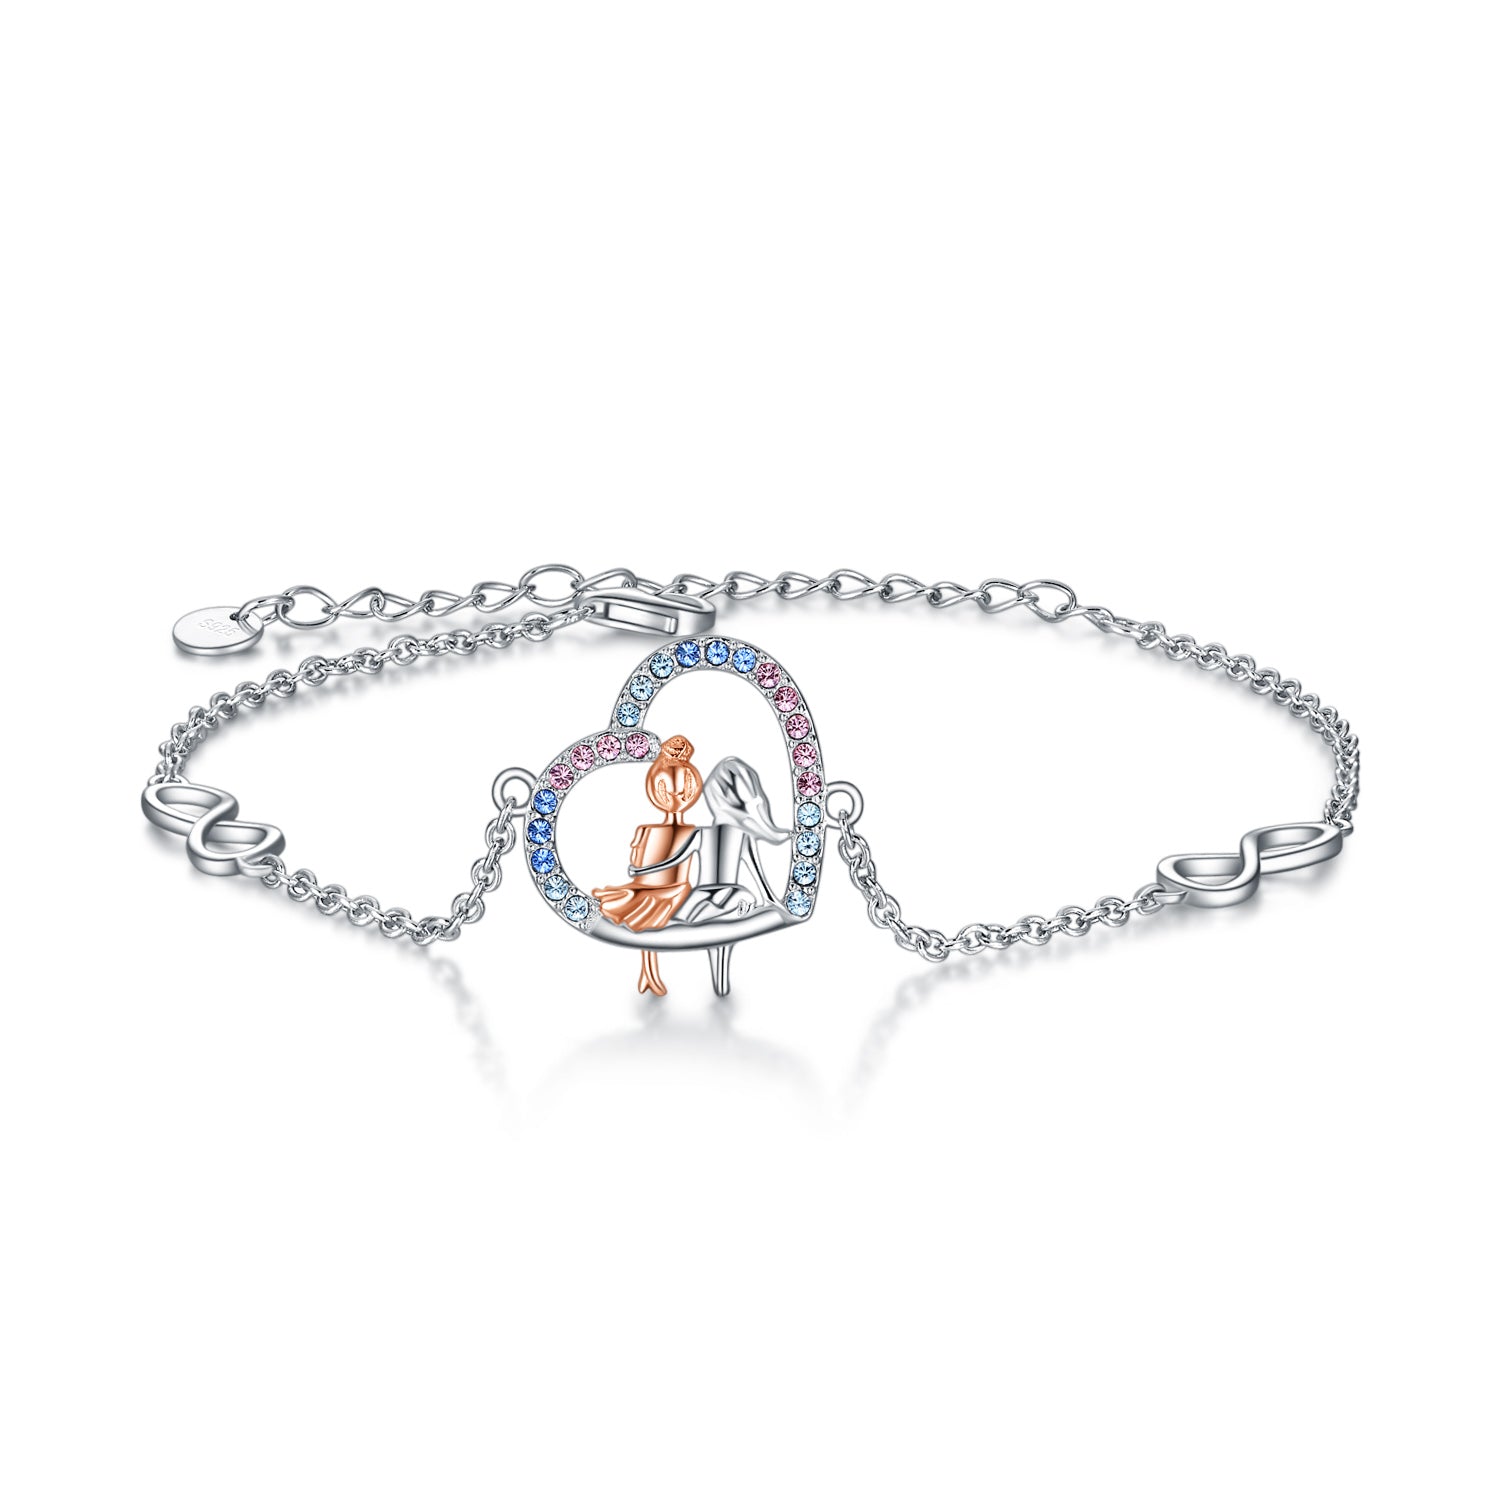 Sisters Bracelet Gift from Sister Sterling Silver Female Friendship Forever Jewelry with Crystal